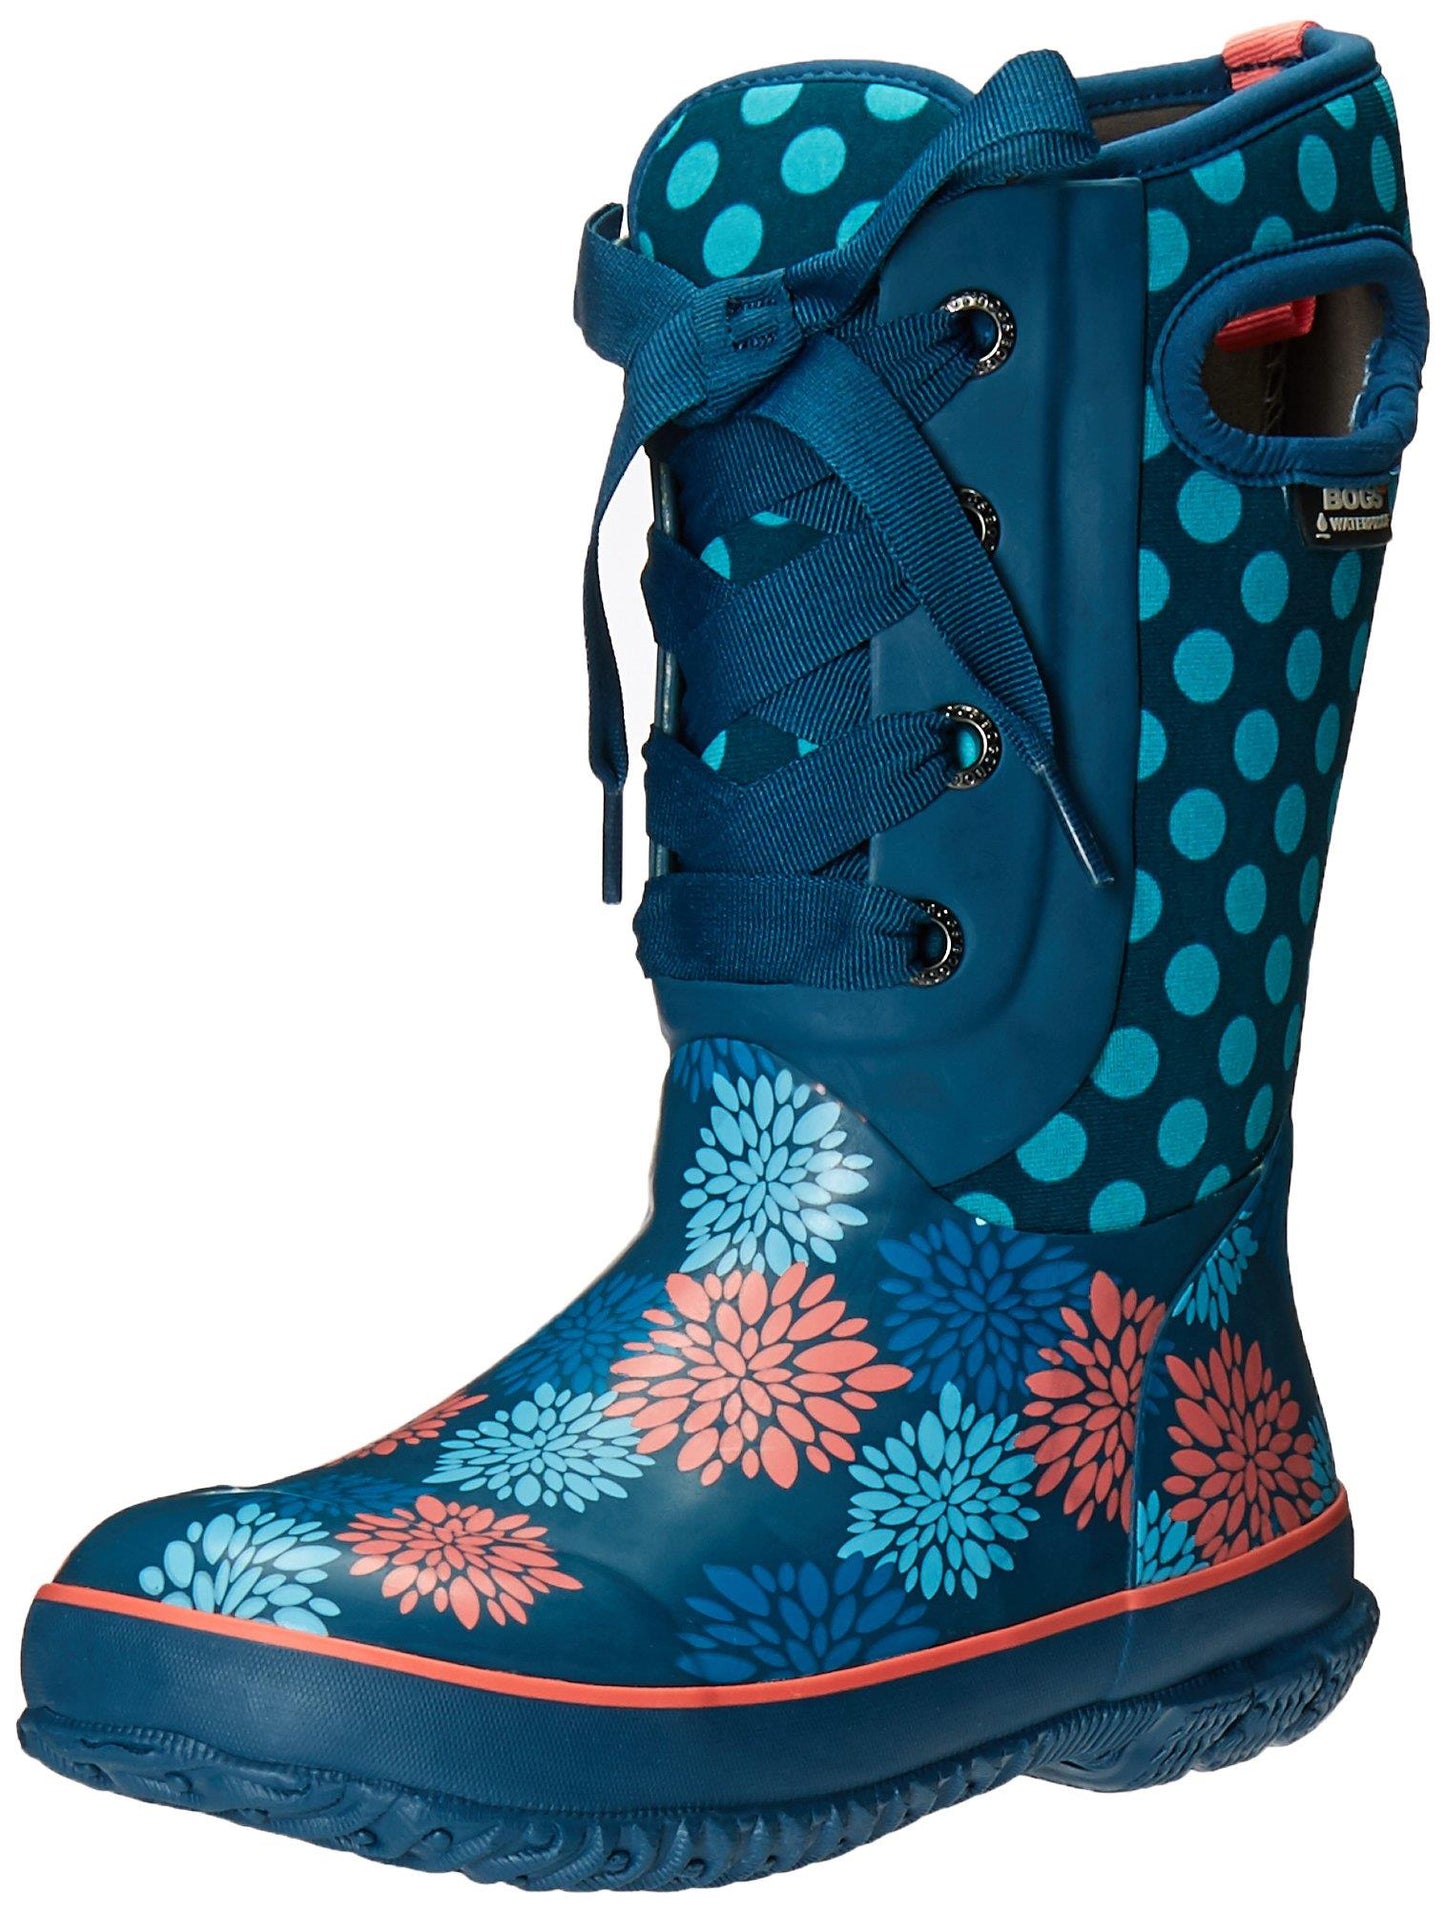 Girls Bogs Casey Pompons Blue Insulated Warm Waterproof Wellies Boots 71992